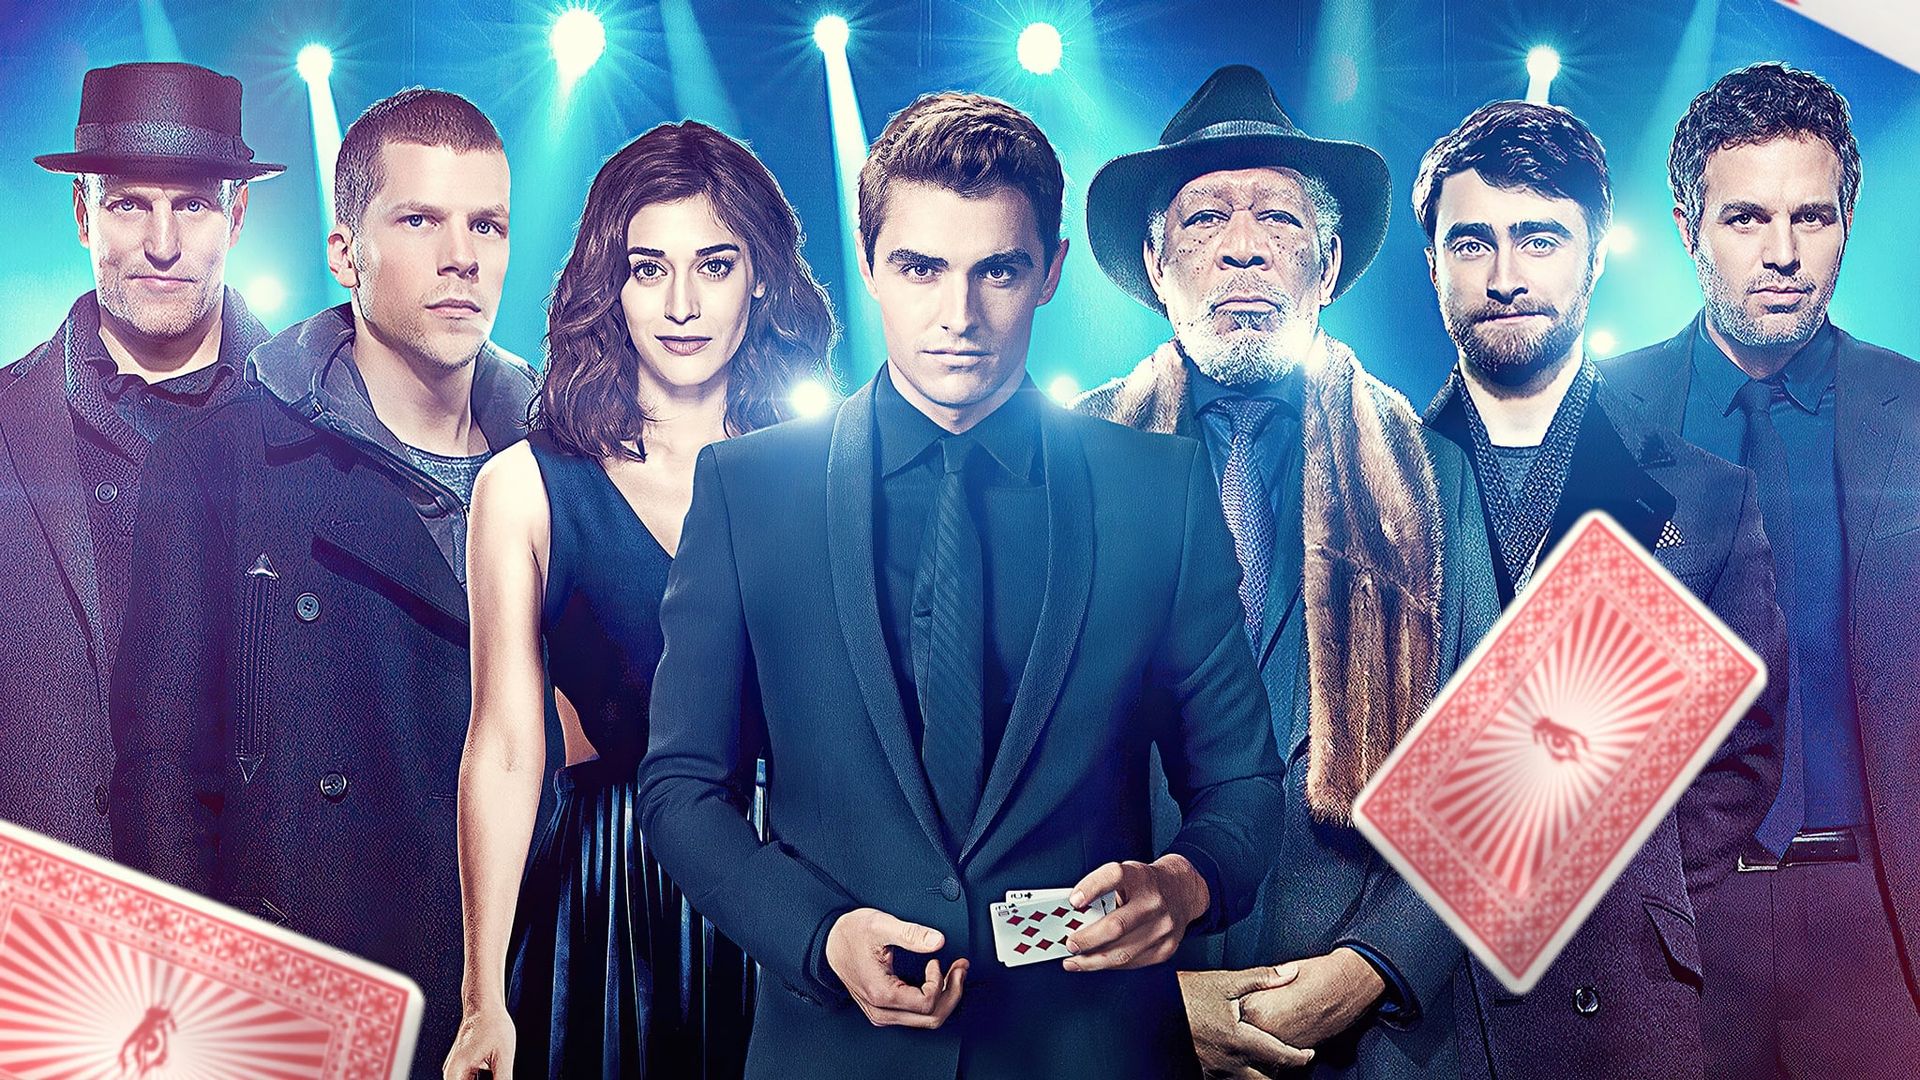 Now You See Me 2 Backdrop